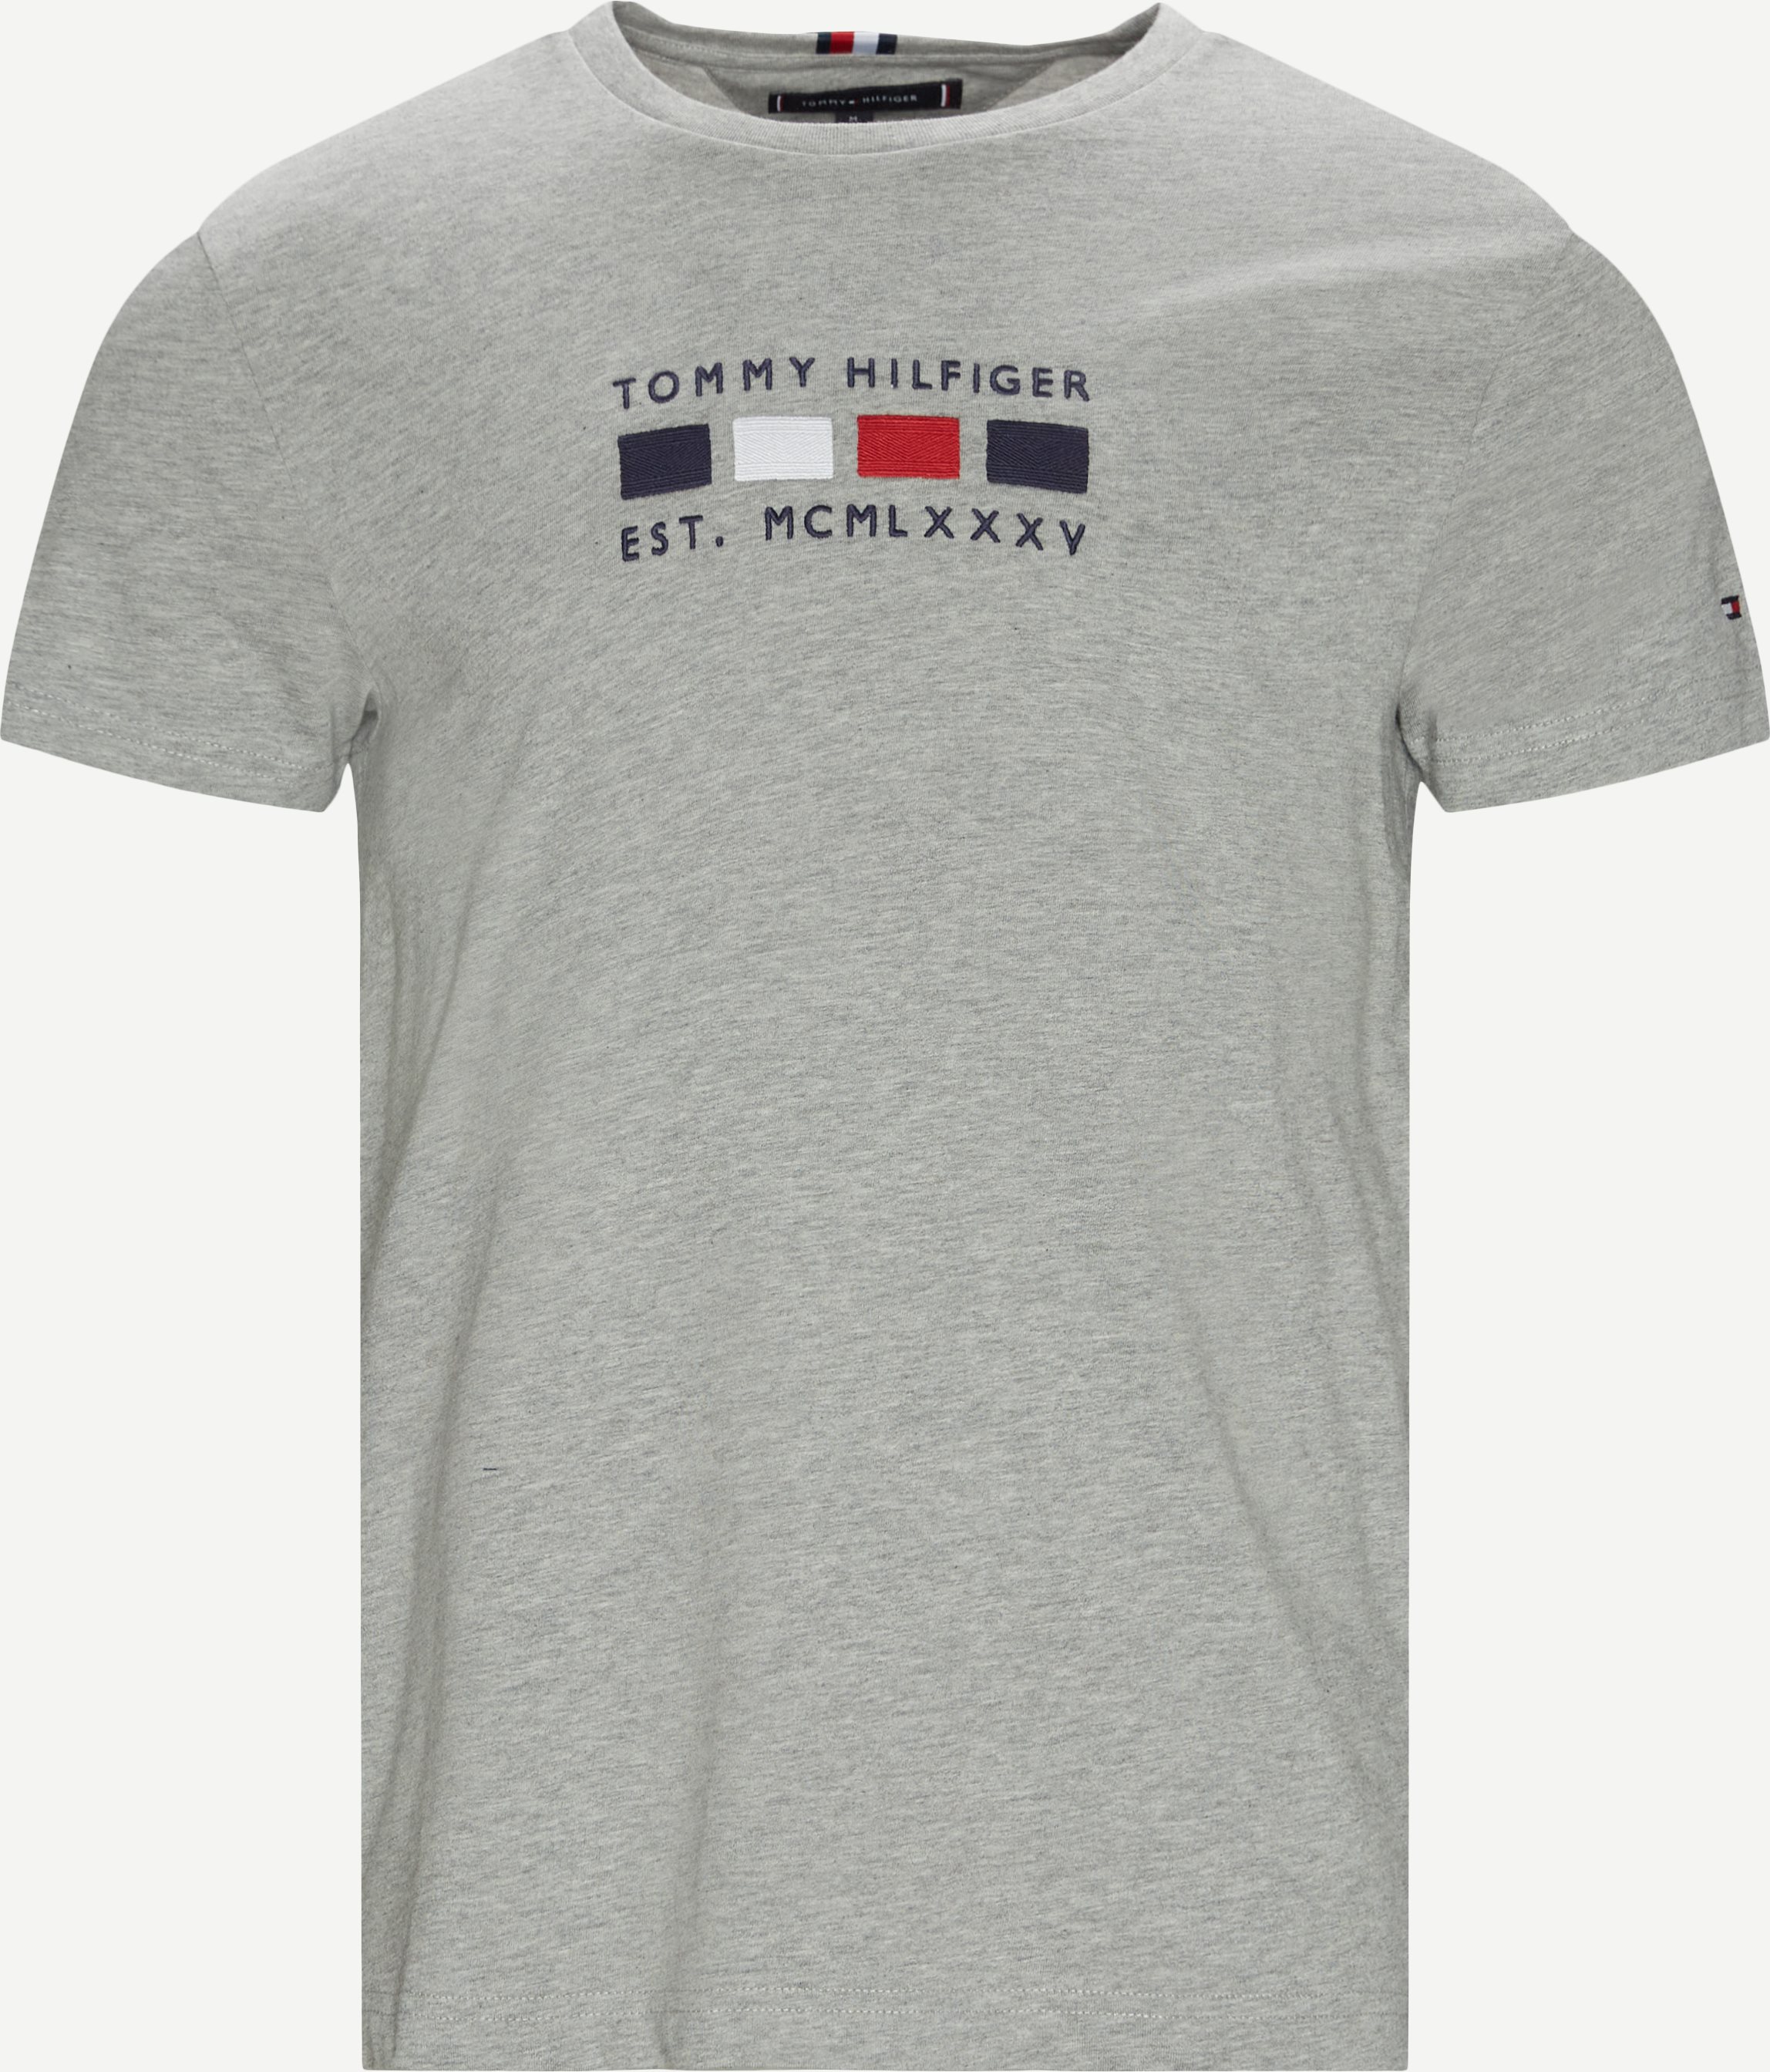 Four Flags Tee - T-shirts - Regular fit - Grey